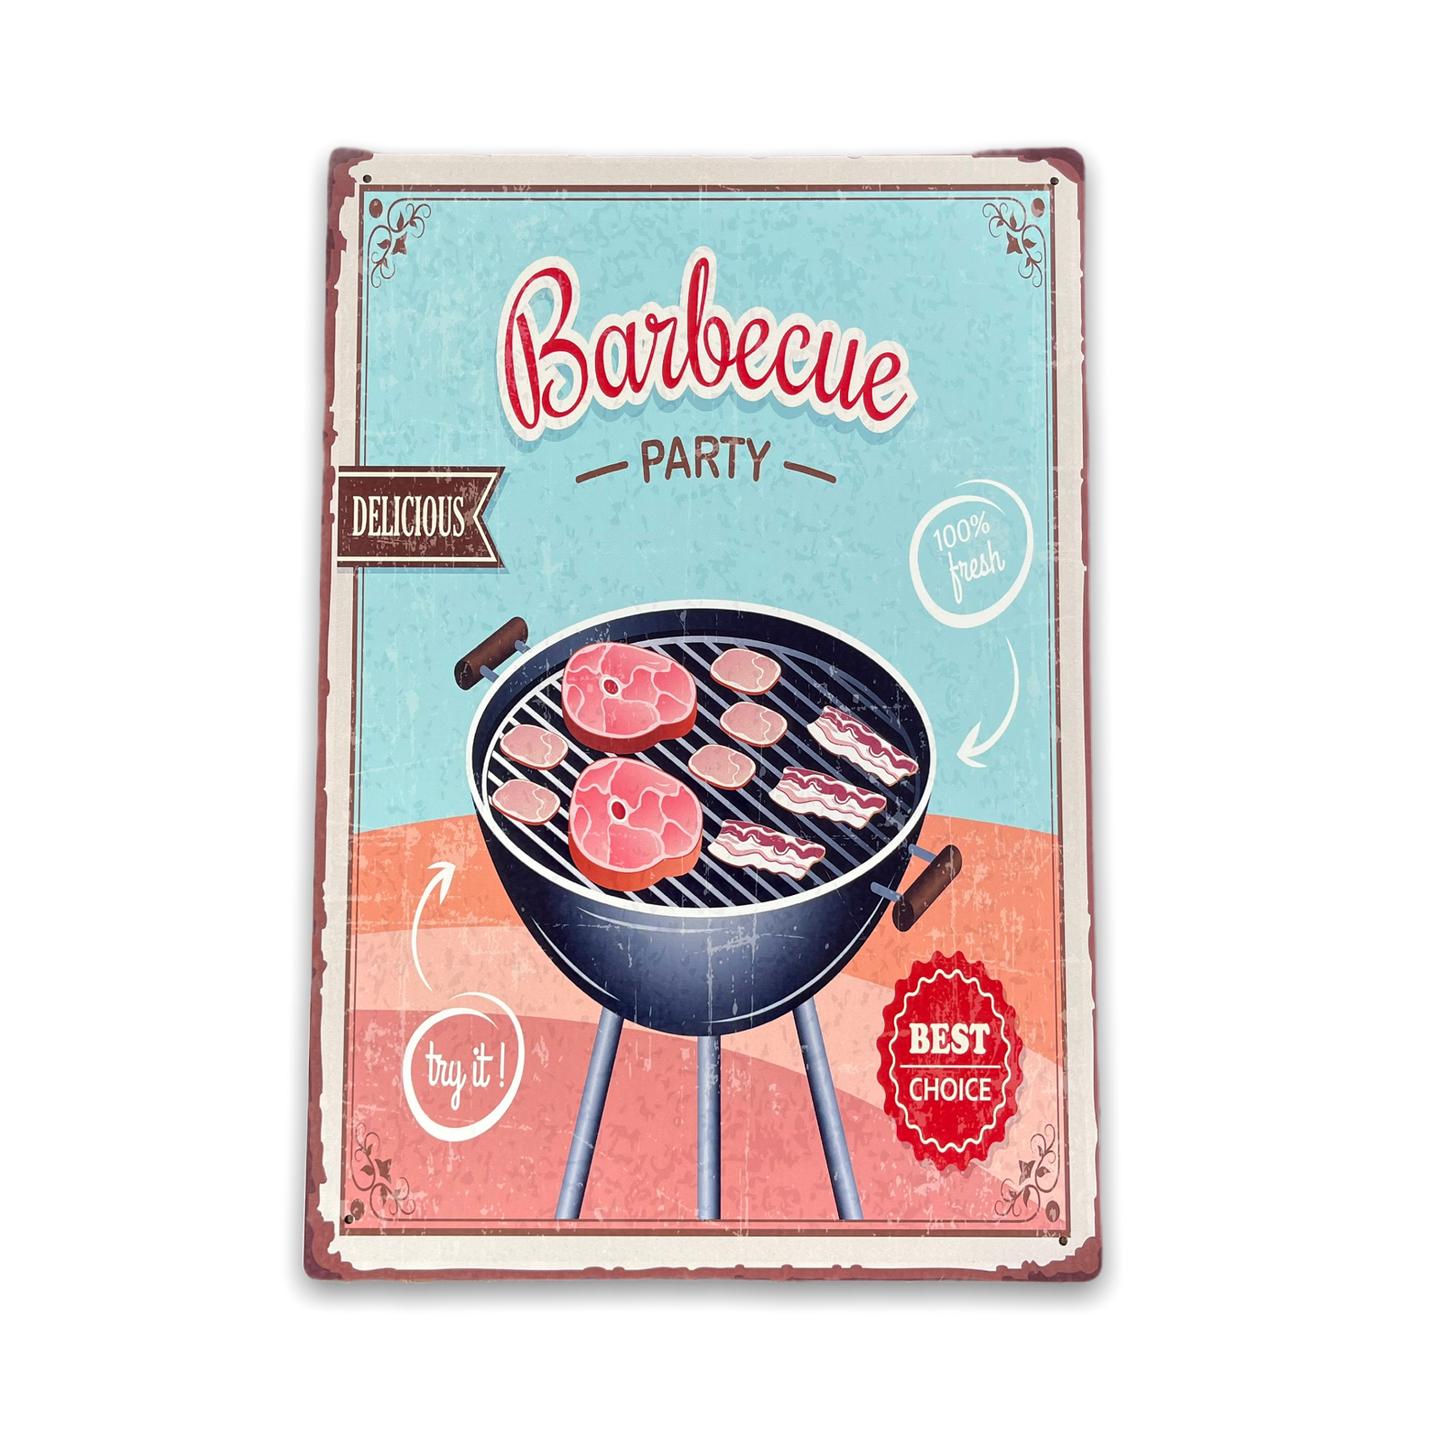 Vintage Metal Sign - Retro Barbecue Party Sign - Kaftan direct